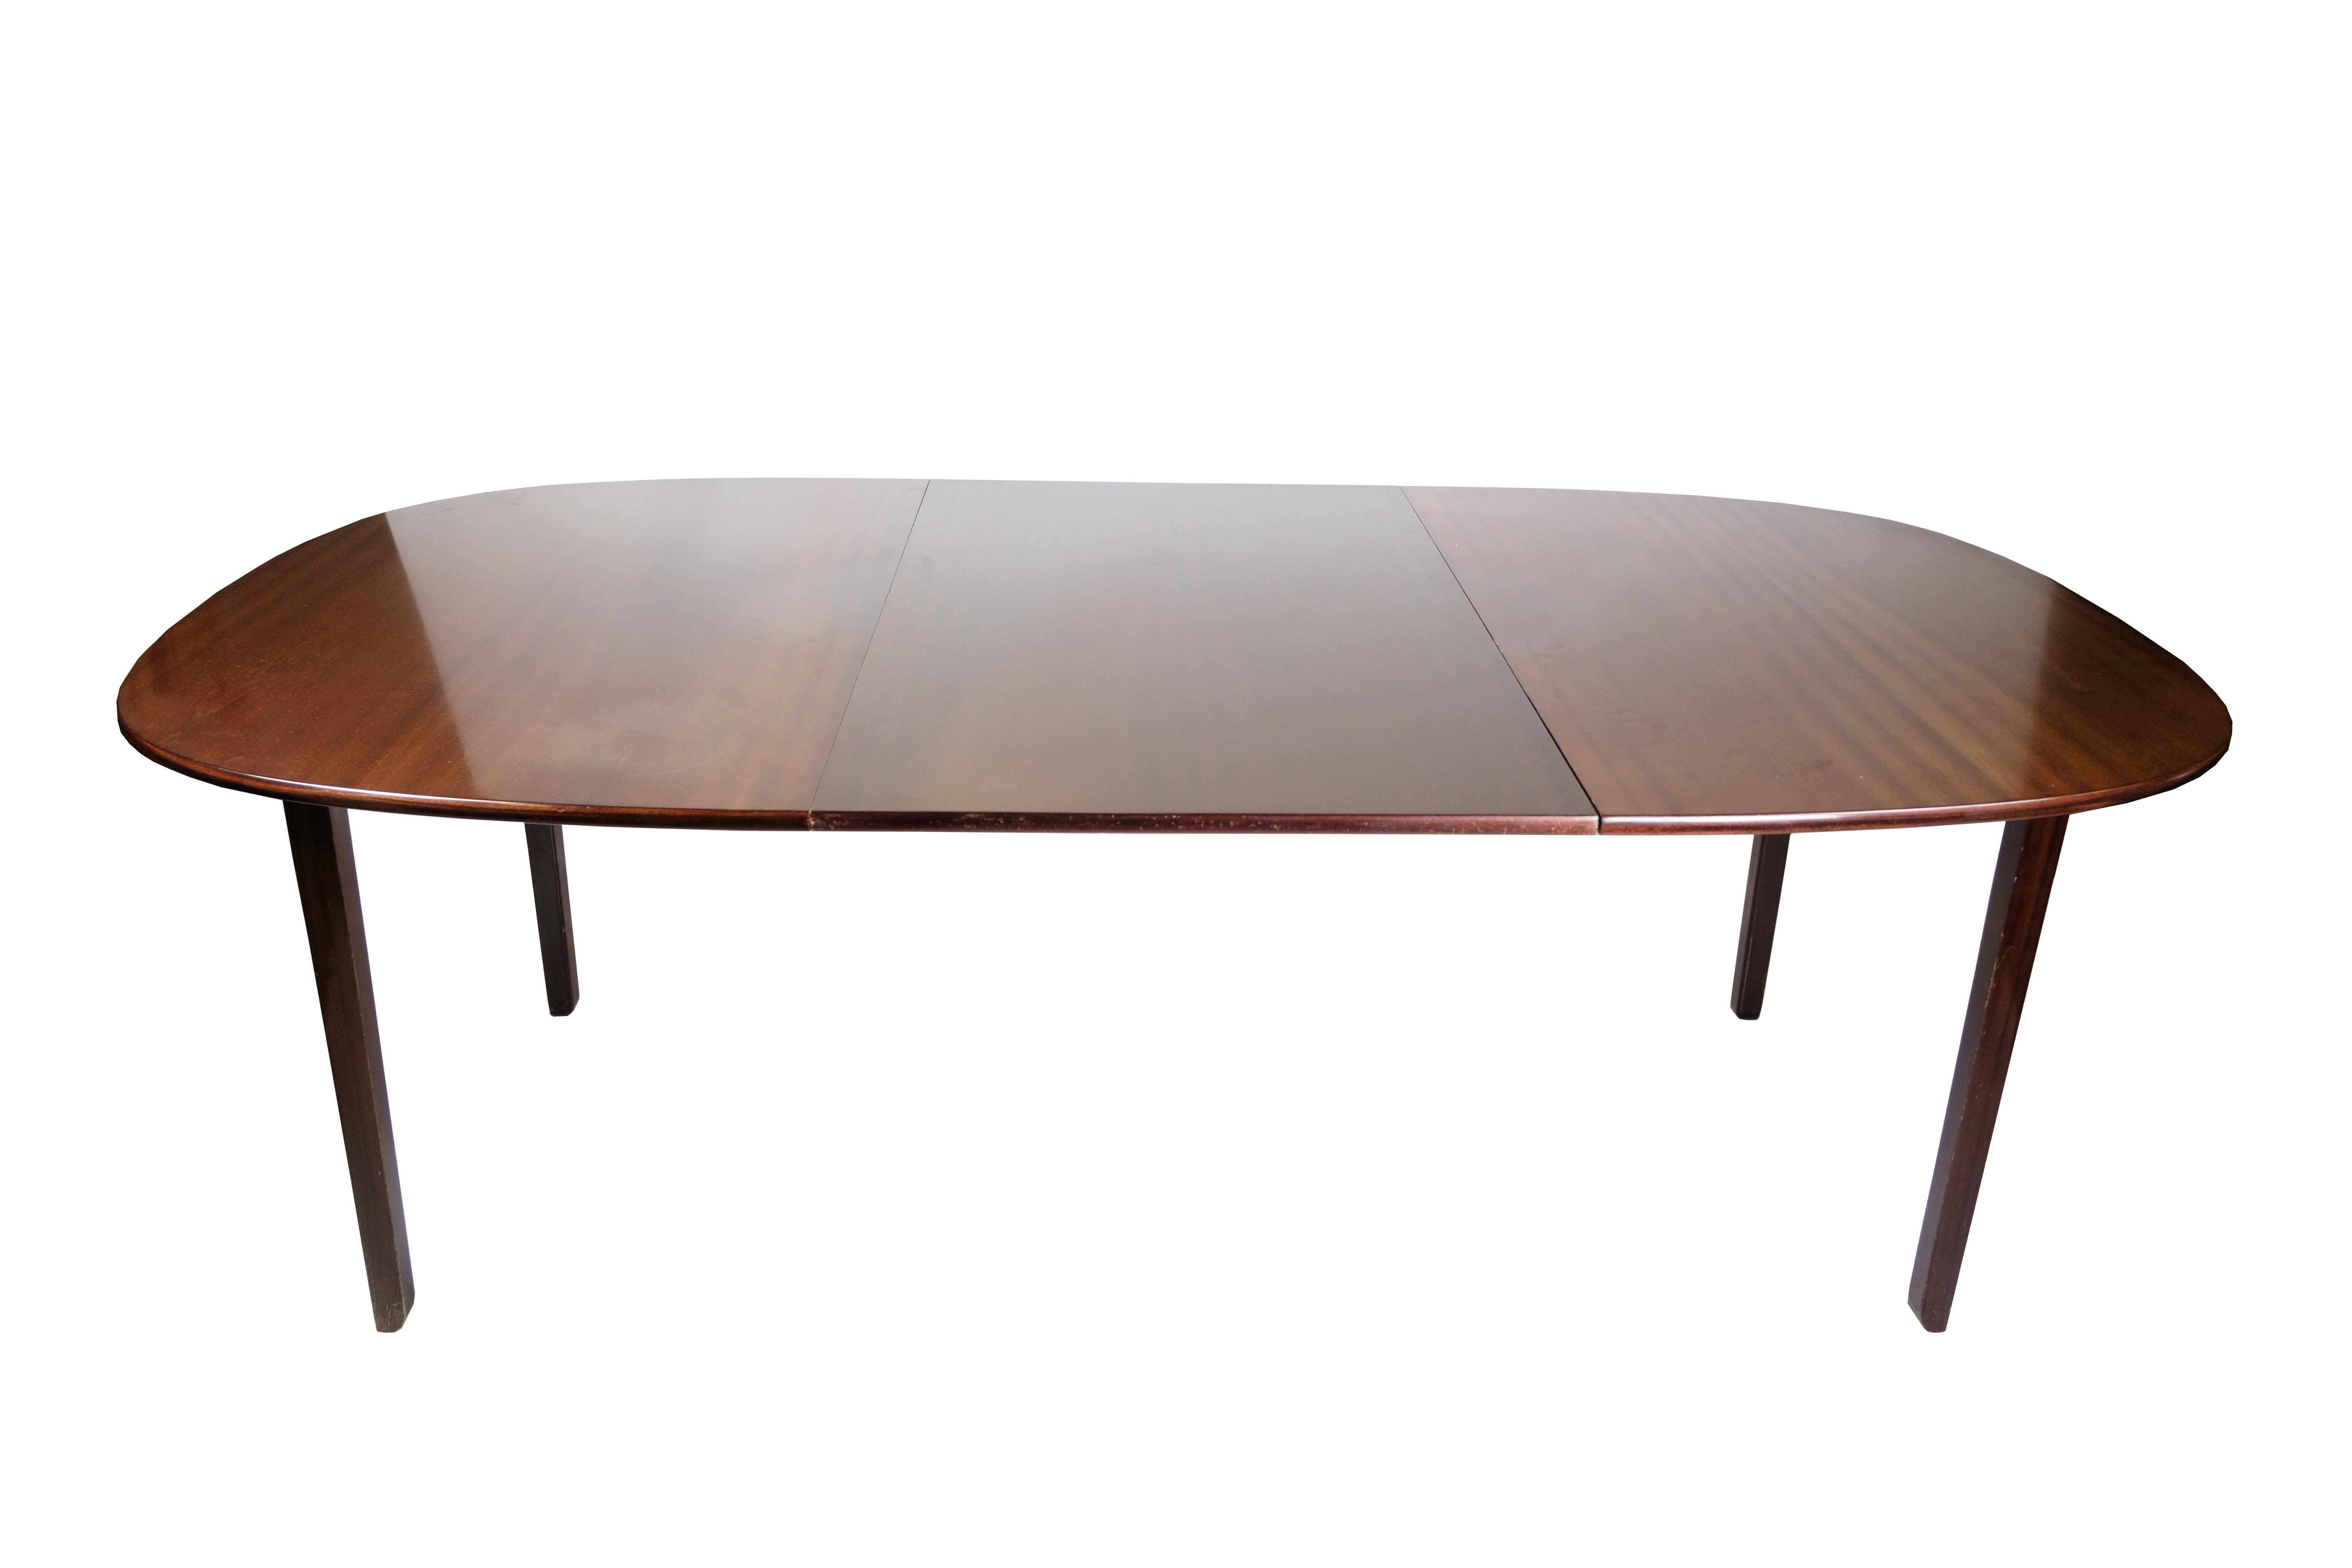 Mid-20th Century Dining Room Table Made In Mahogany By Ole Wanscher From 1960s For Sale